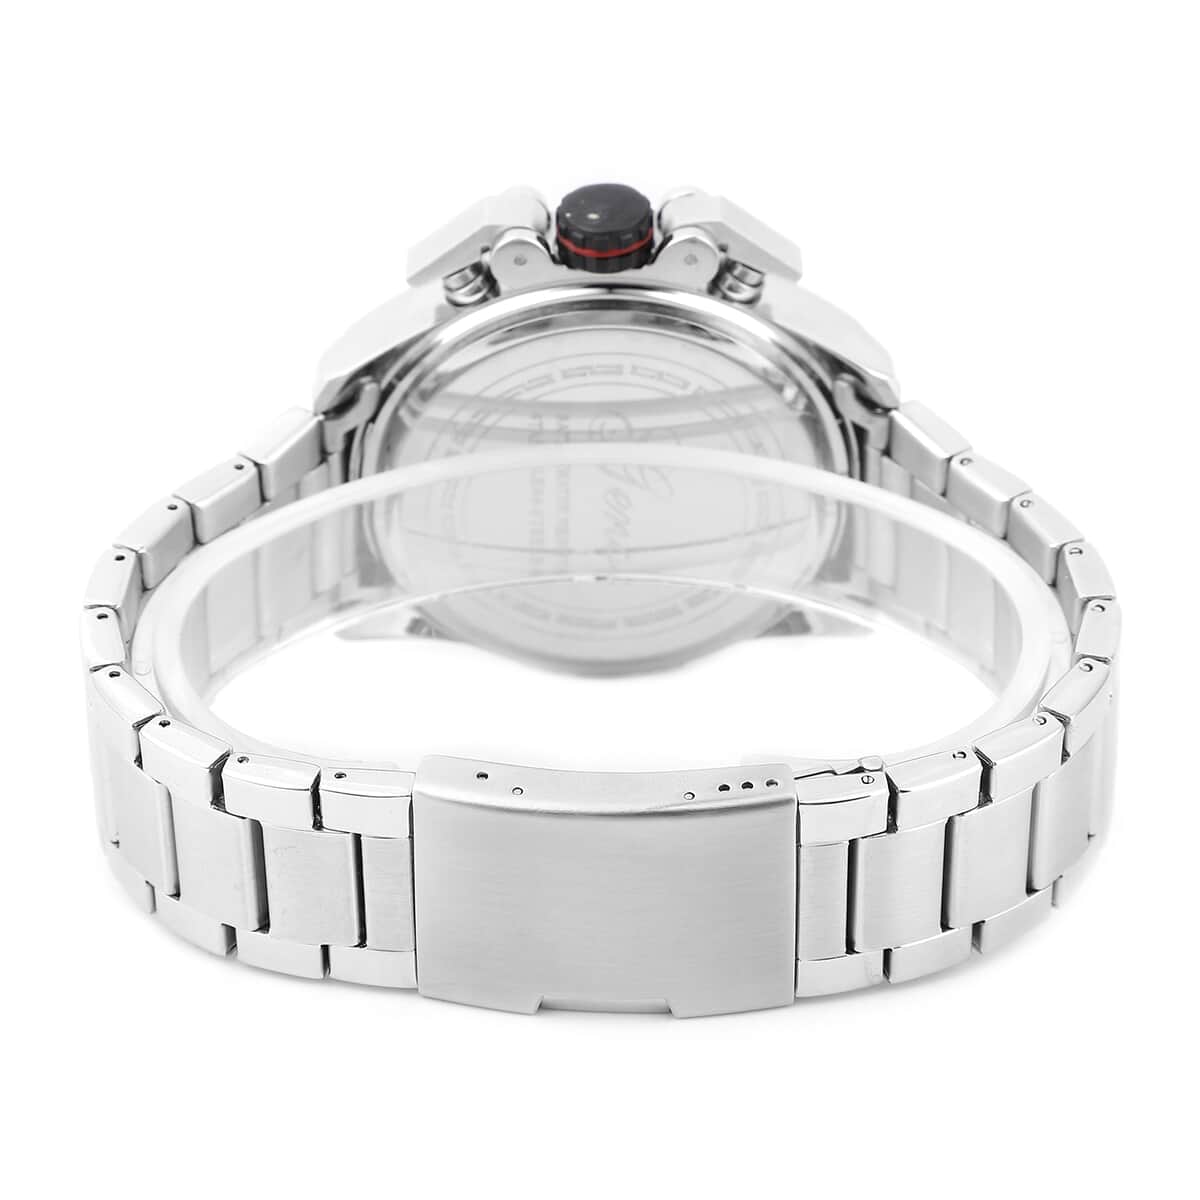 Genoa Multifunction Quartz Movement Watch with Stainless Steel Strap and Back image number 6